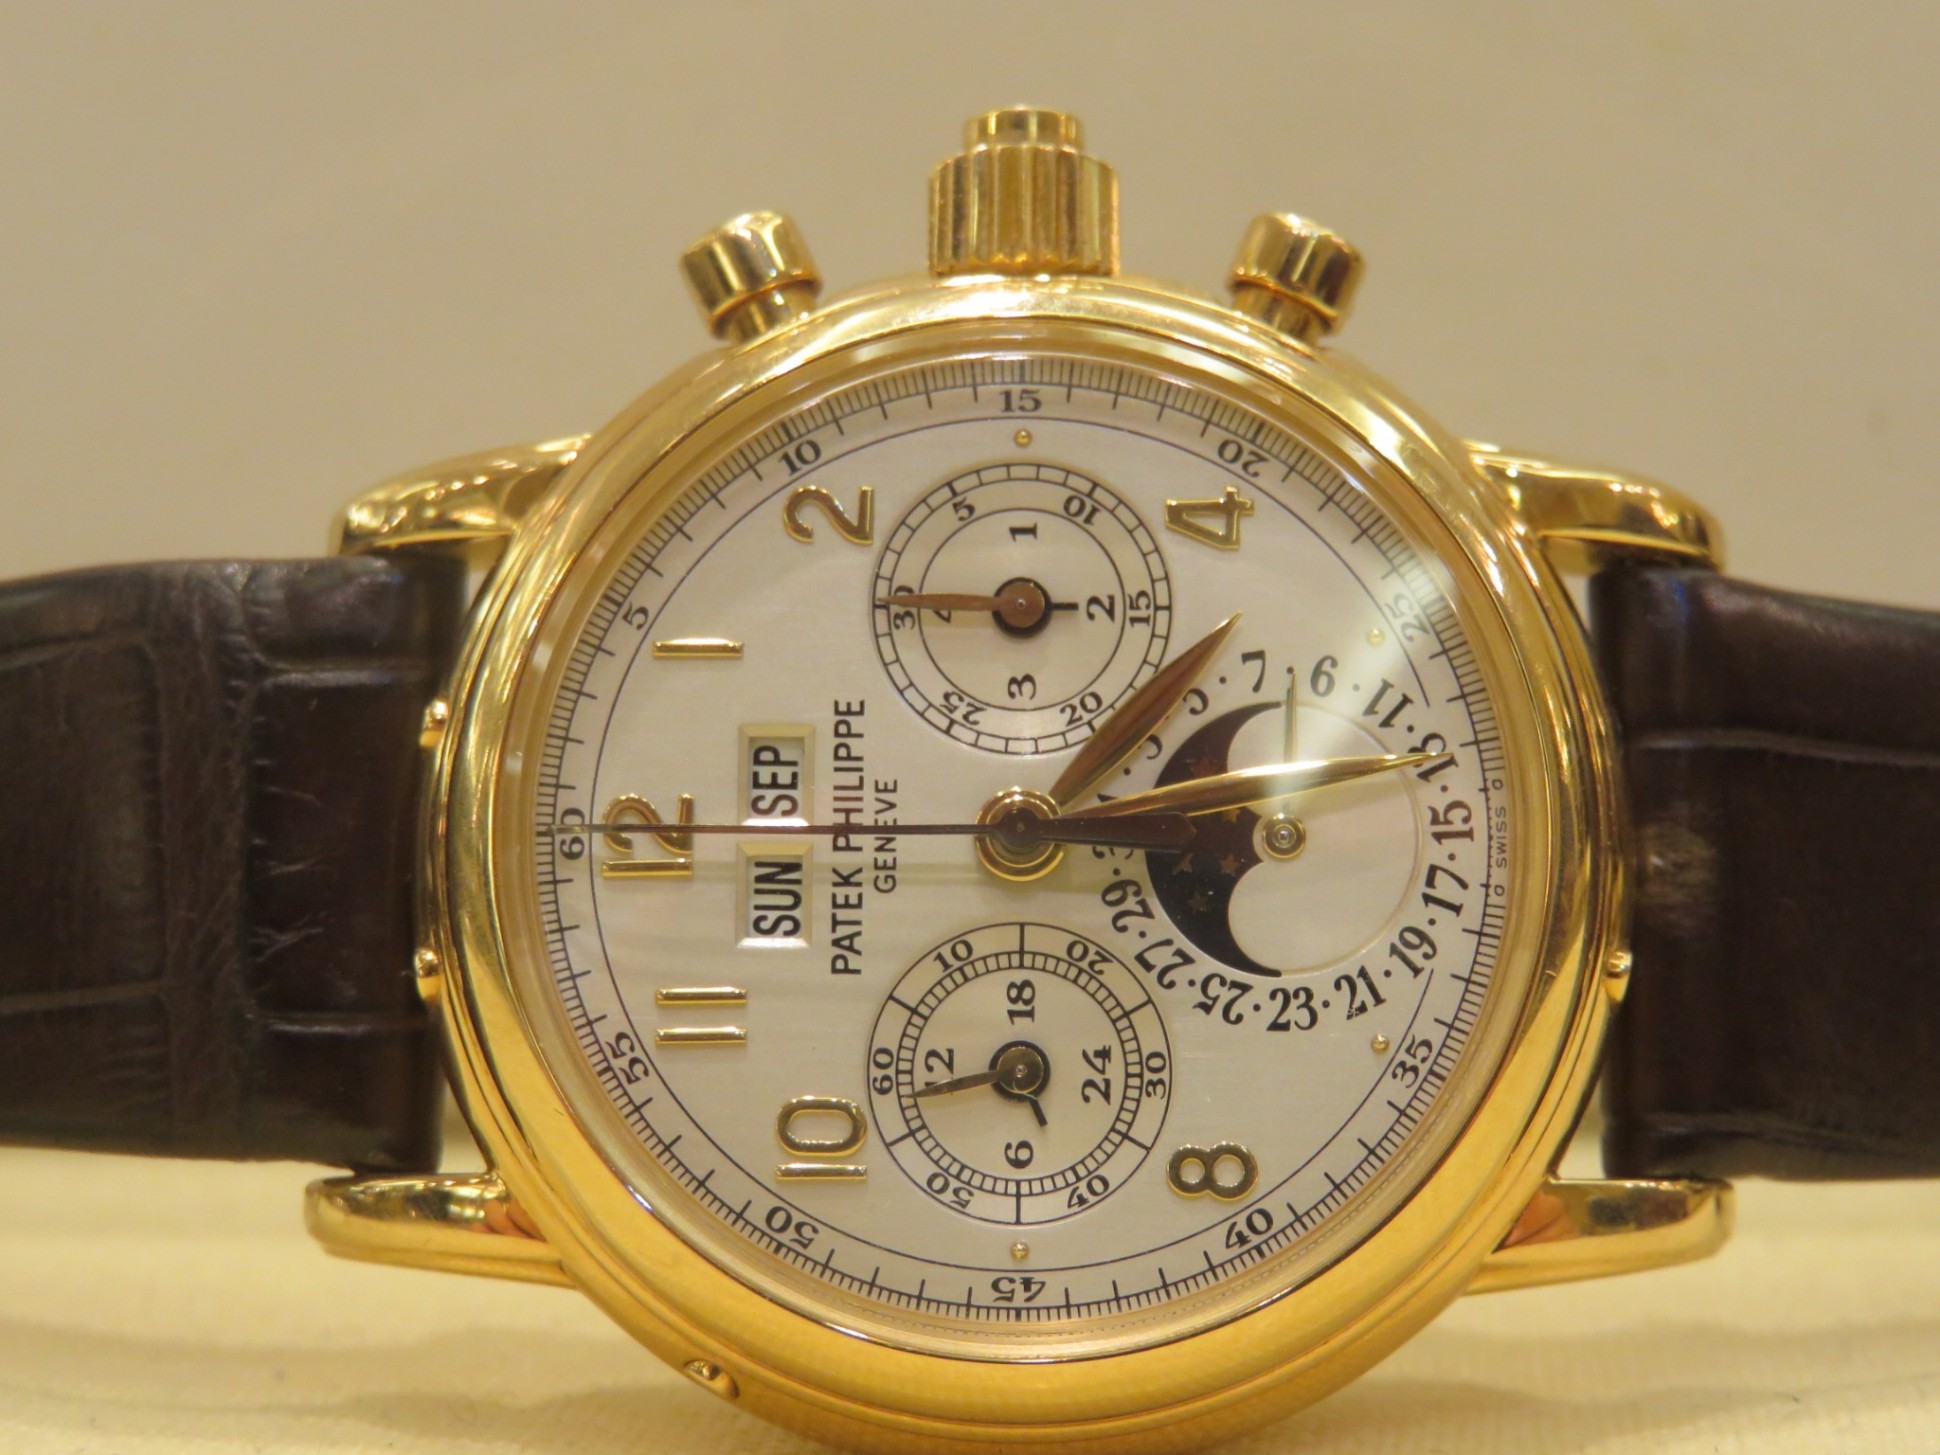 Meeting The Patek Philippe 5004 At IWJG New York